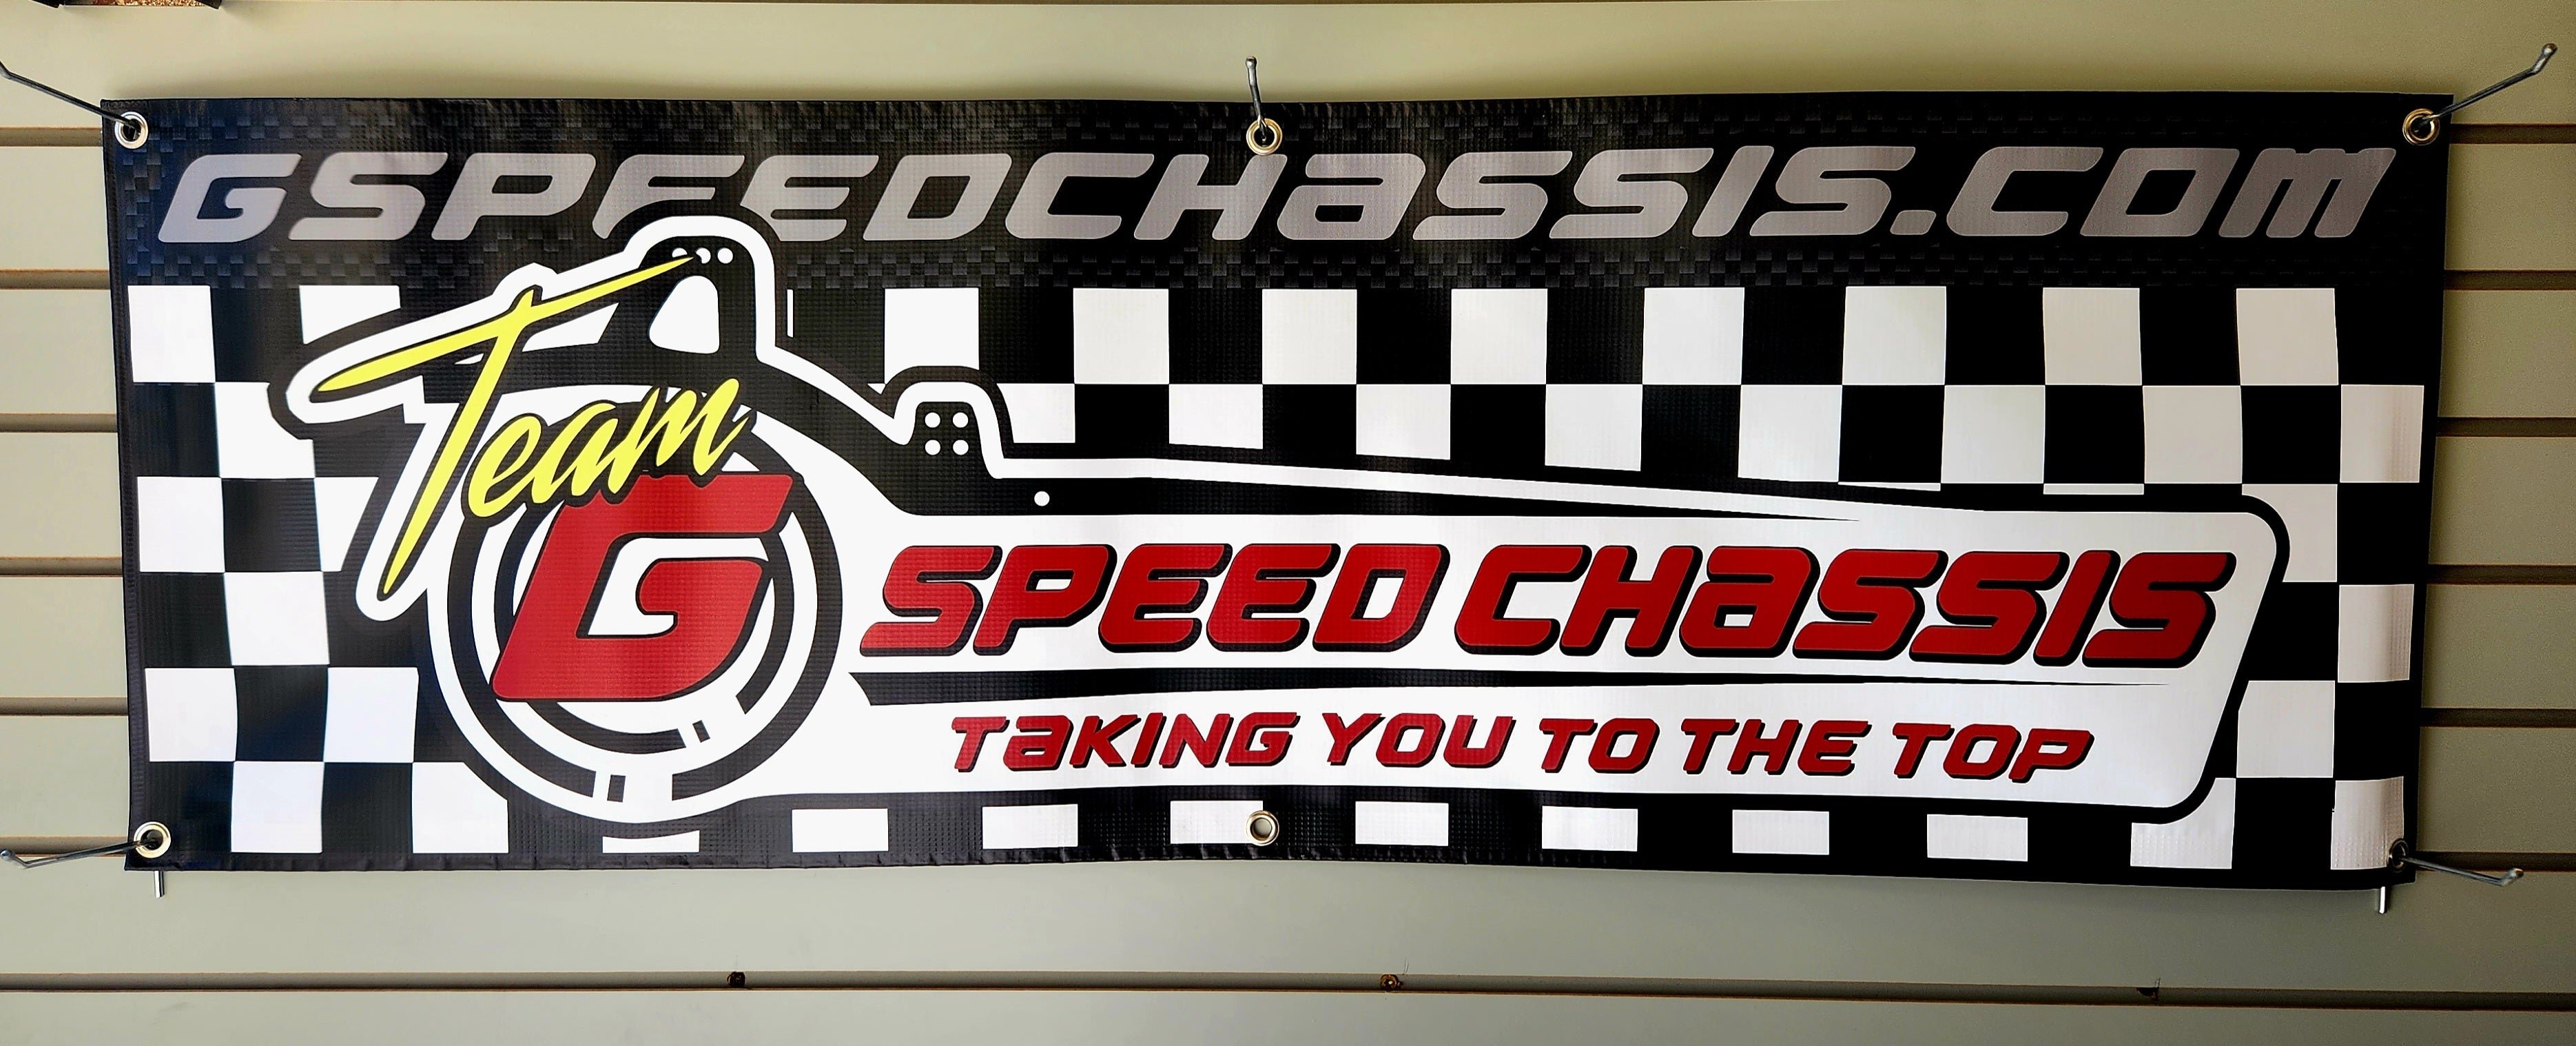 Team GSPEED Chassis 4' Banner